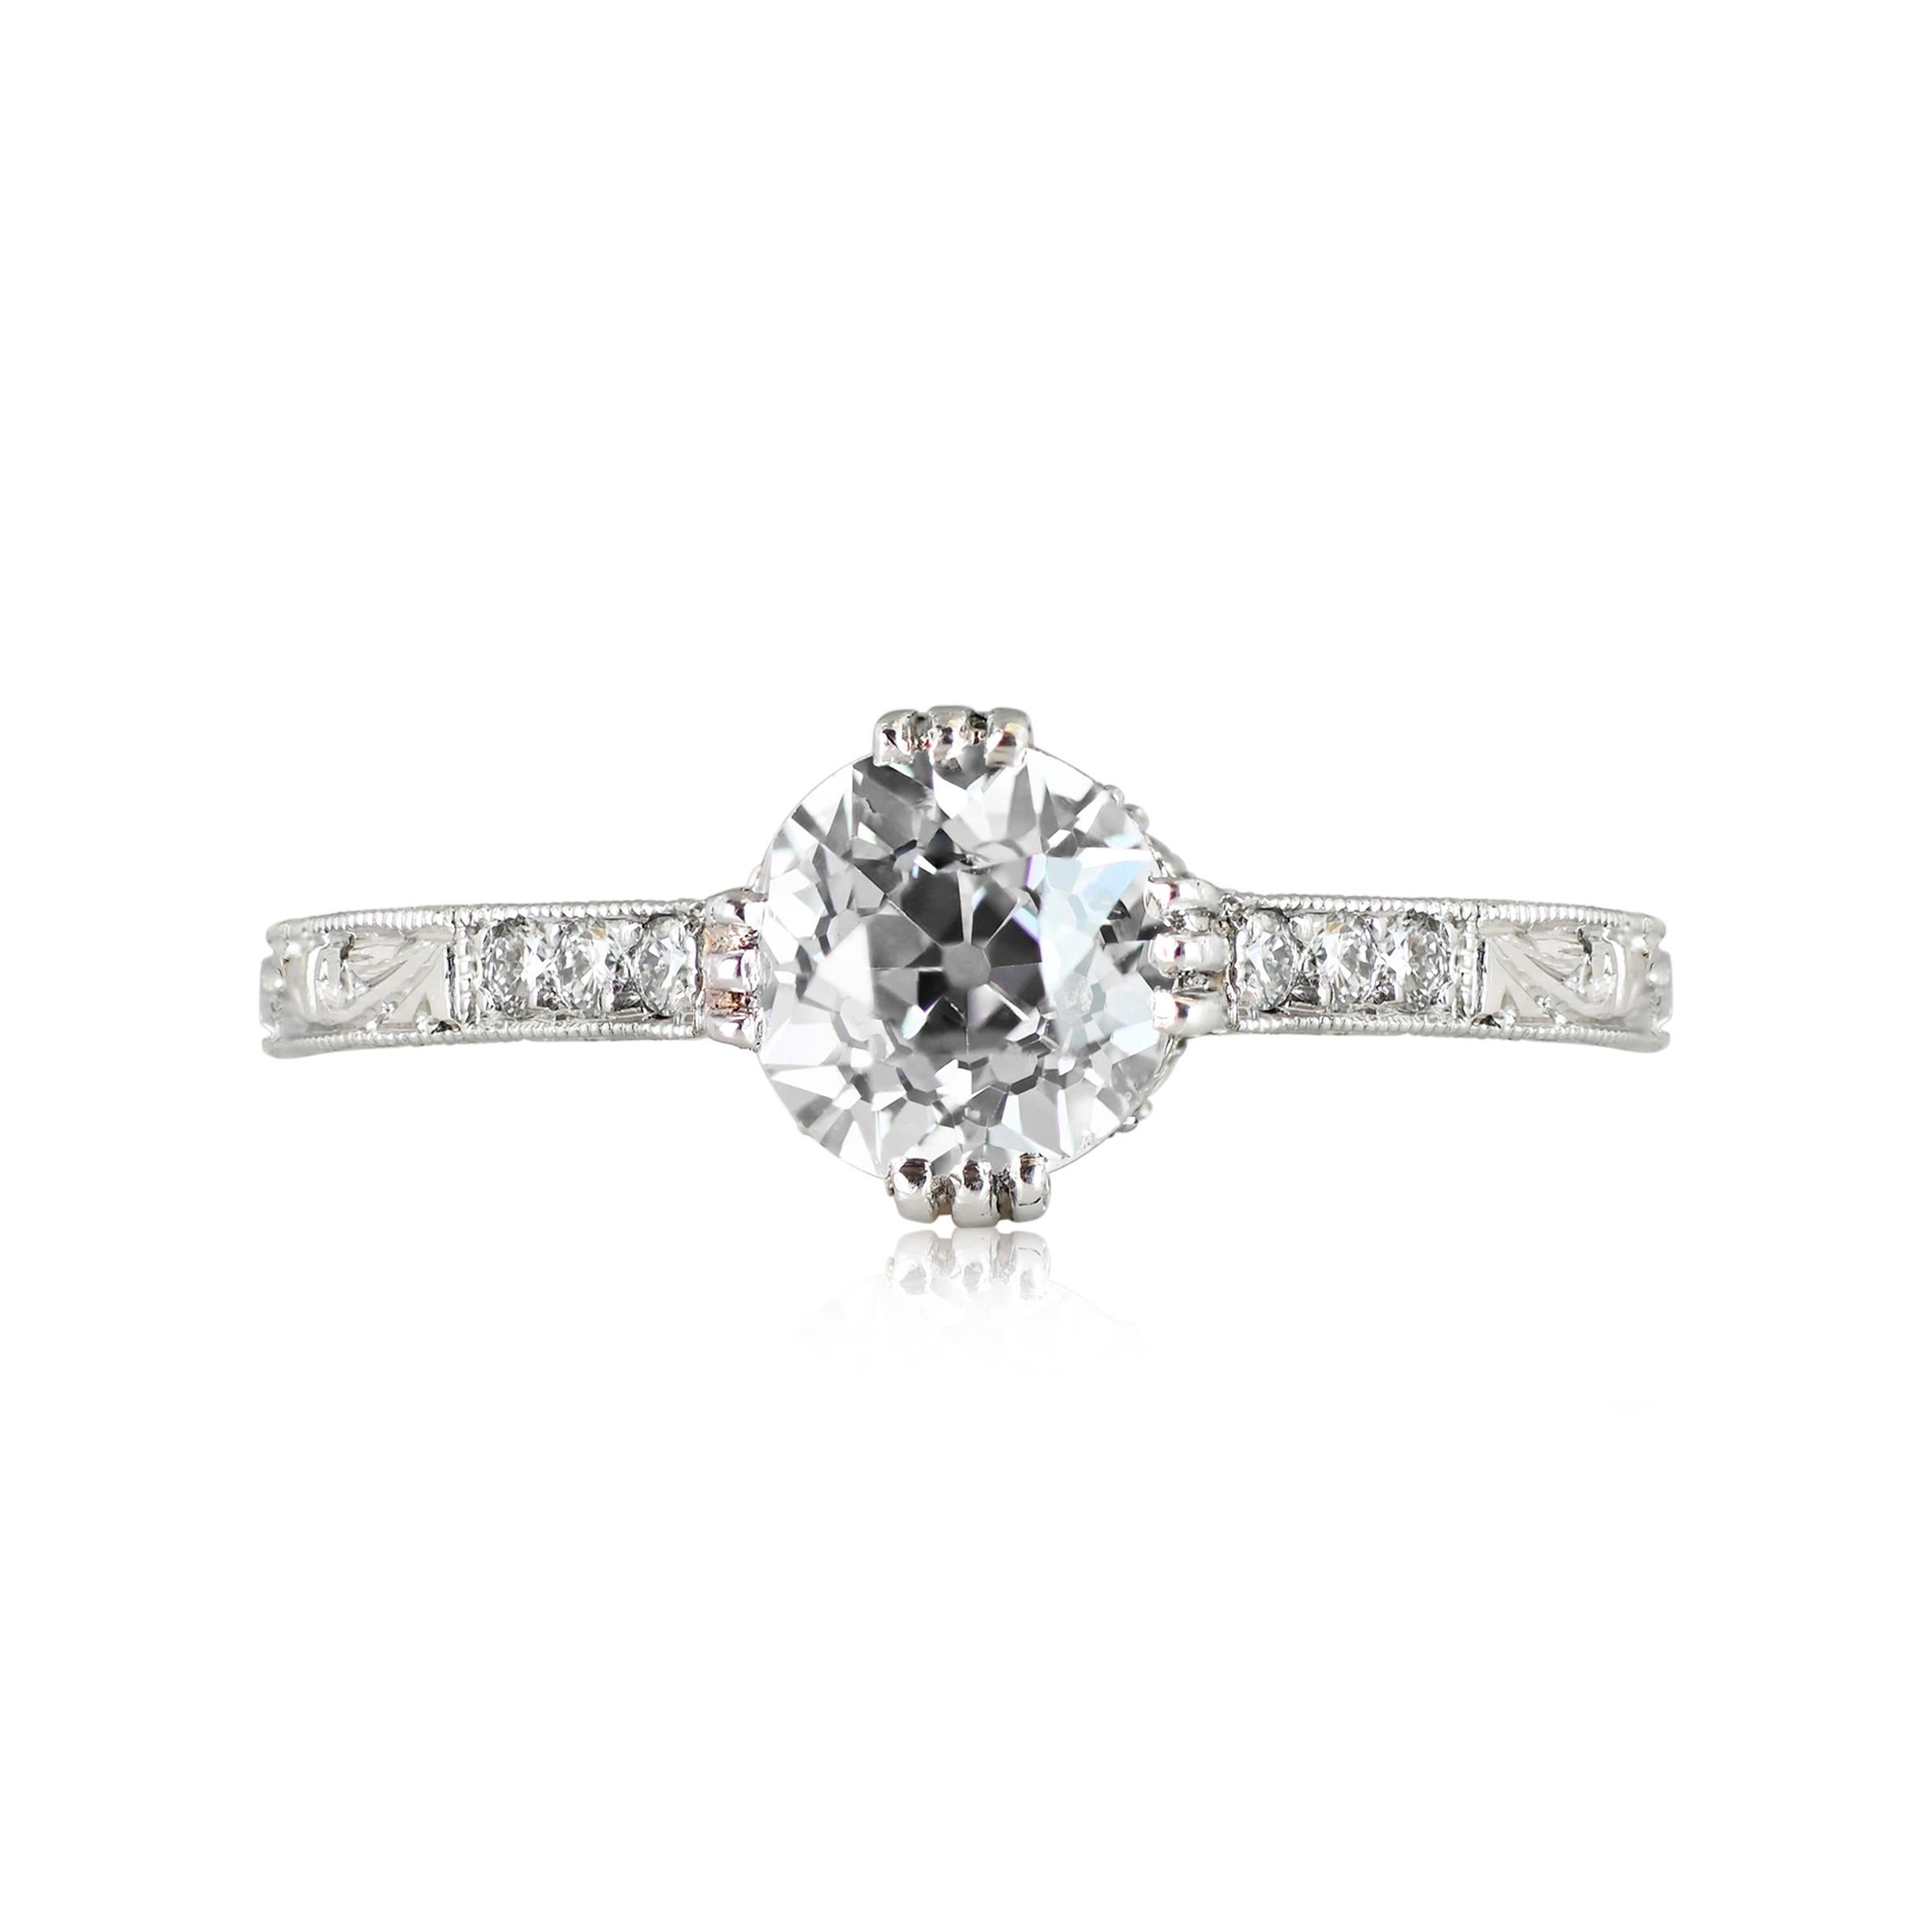 A stunning vintage estate diamond engagement ring, graced with a GIA-certified old European cut diamond in a handcrafted platinum setting. The ring is delicately embellished with diamonds, etching along the shank, and fine milgrain detailing. The